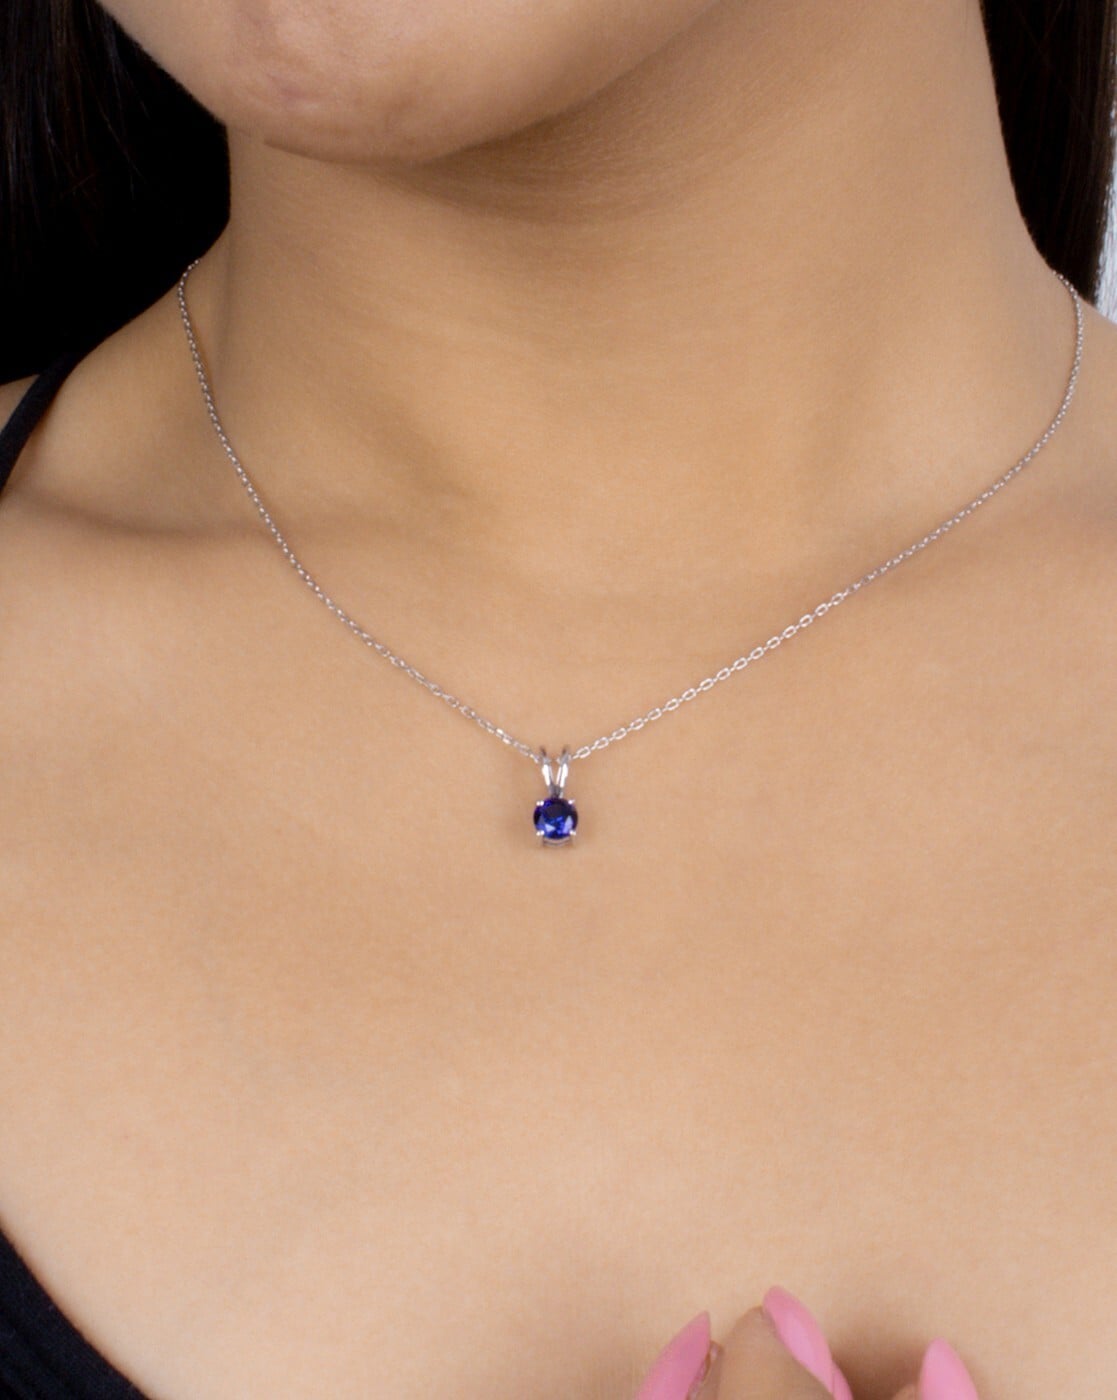 Genuine Lab Grown Royal Blue Sapphire Necklace, Oval Sapphire Pendant With  One Diamond Simulant, September Birthstone Gift,blue Gem Necklace - Etsy